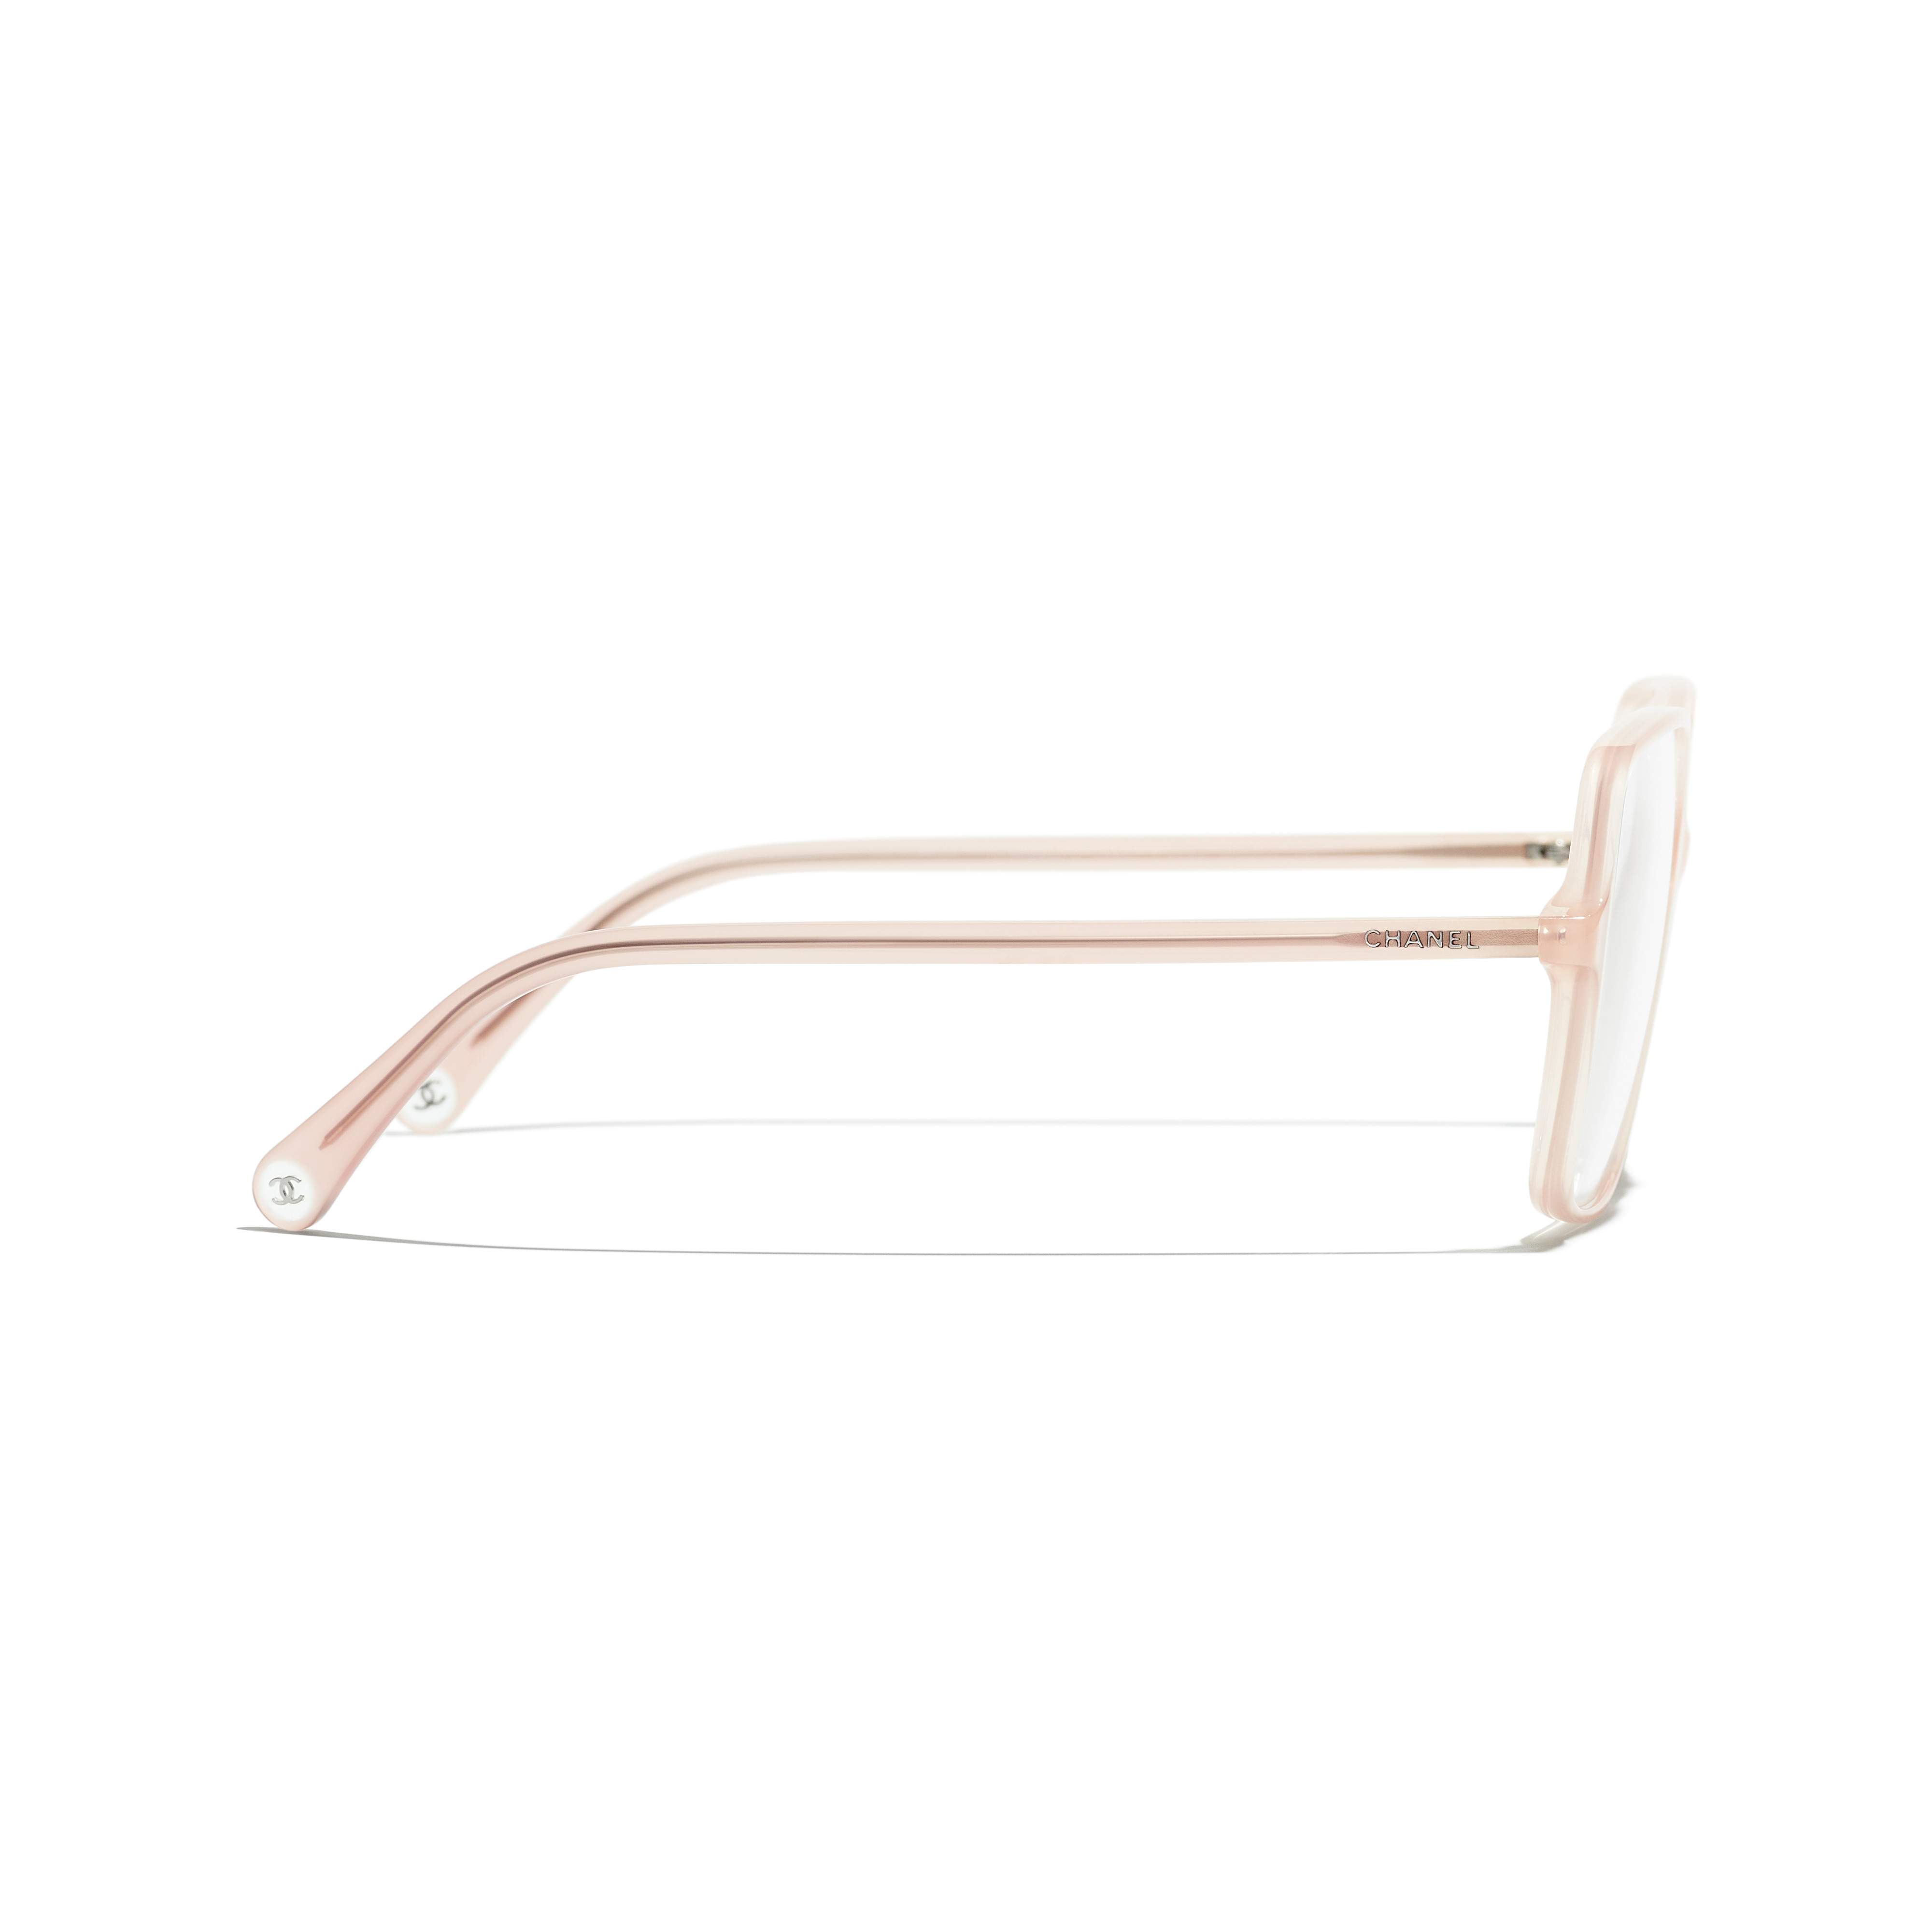 Eyeglasses CHANEL CH3448 1732 55-16 Peach in stock | Price 166,67 